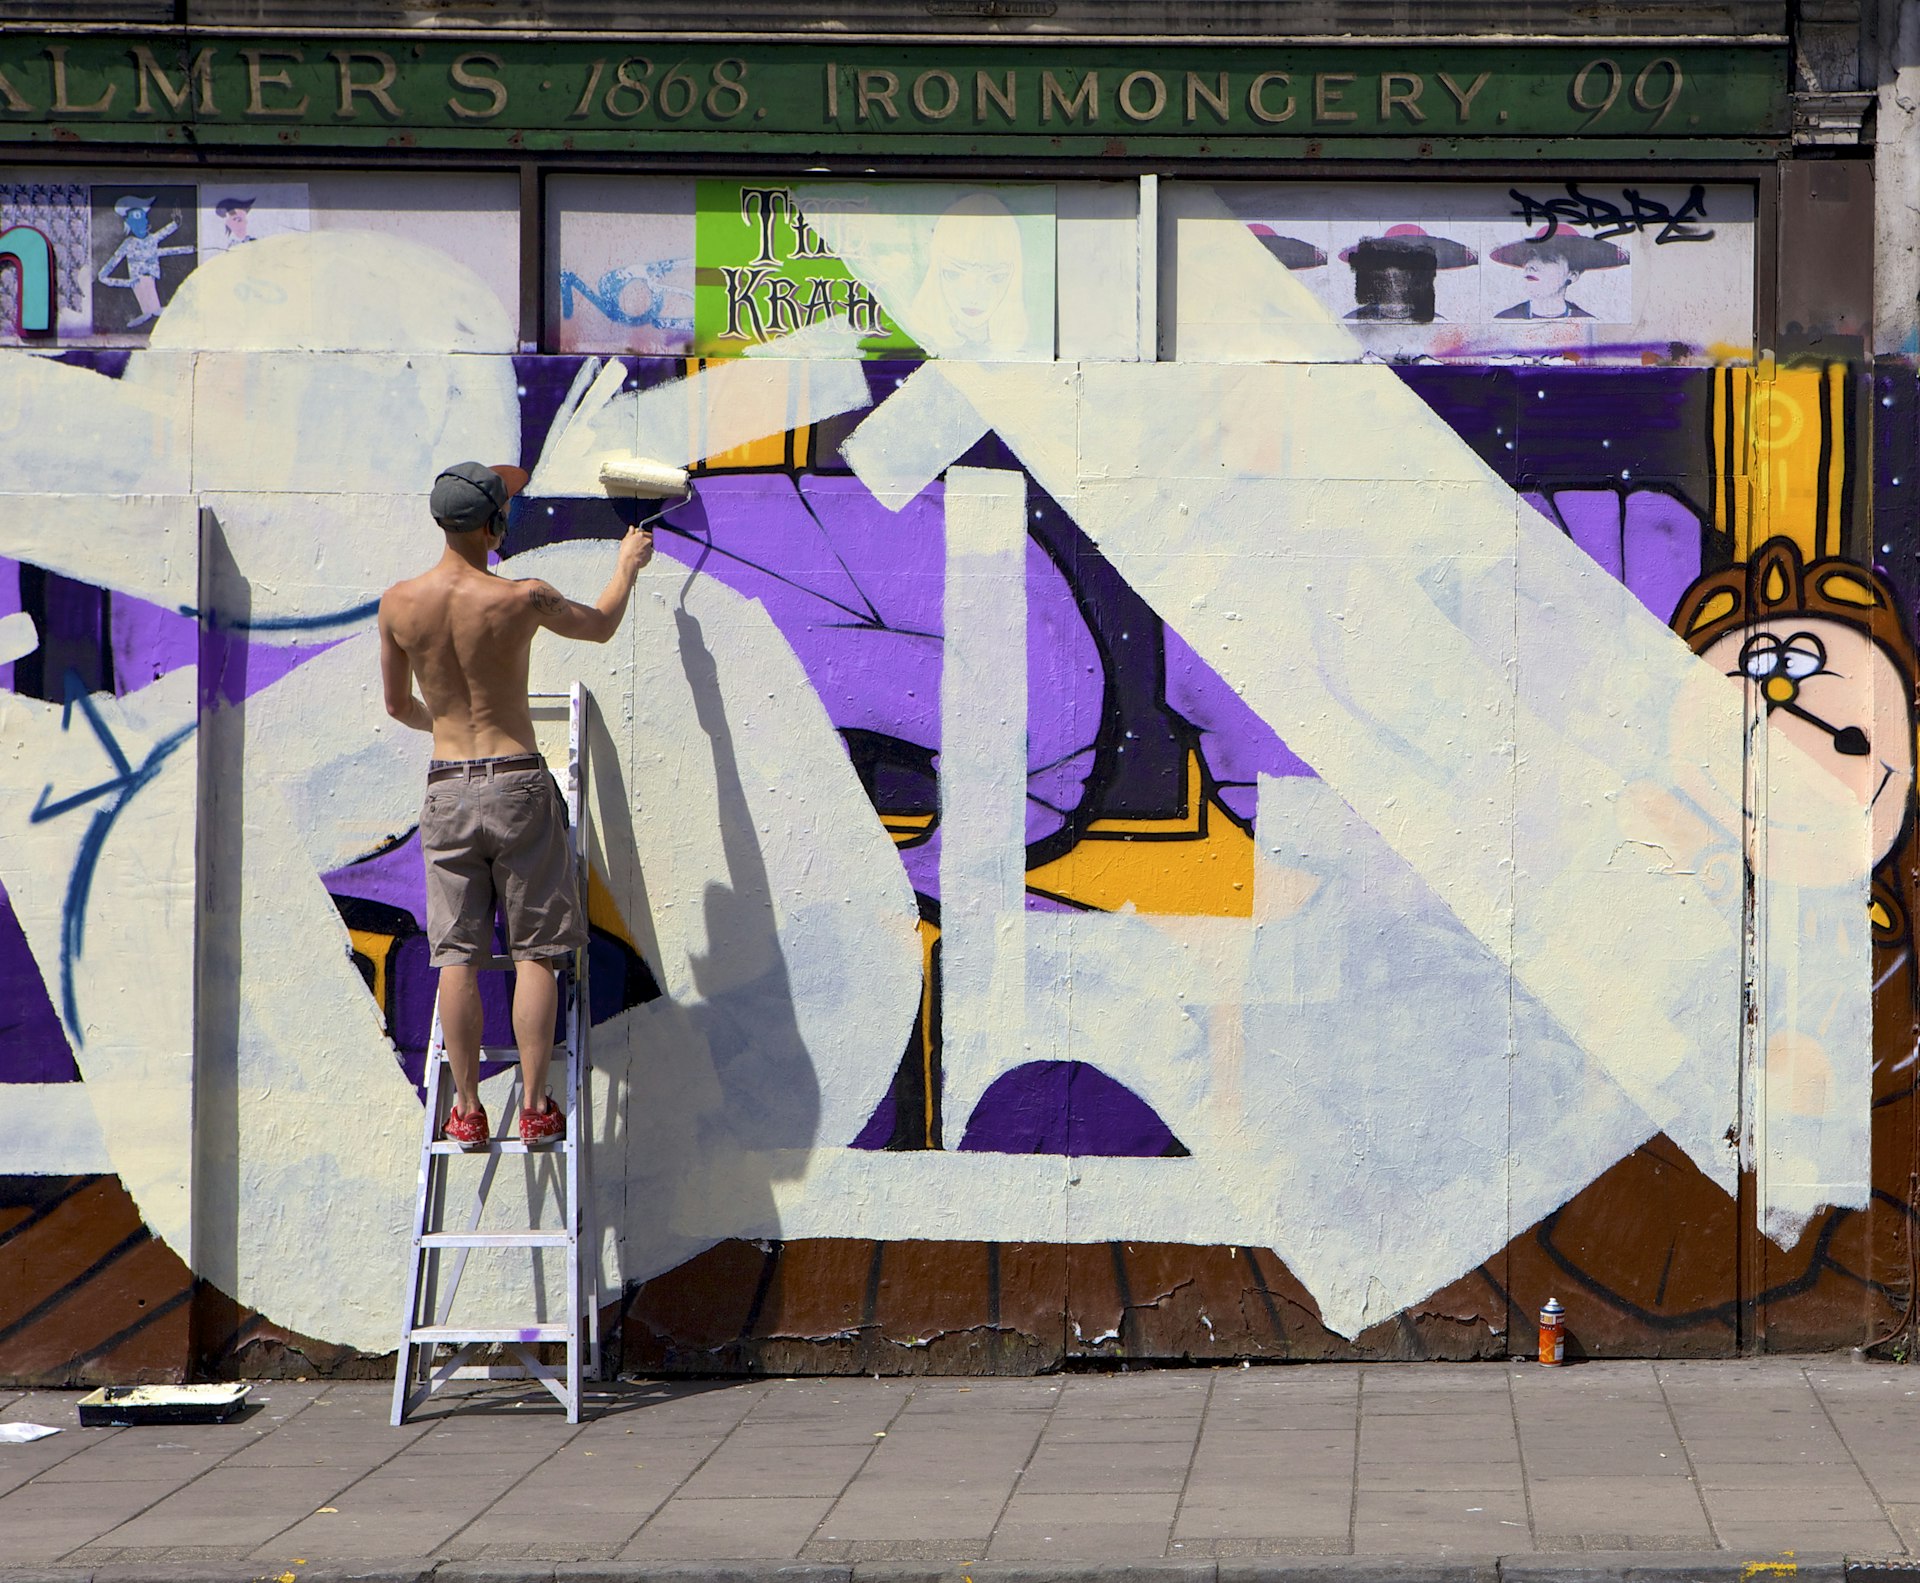 A street artist painting over an old shop front